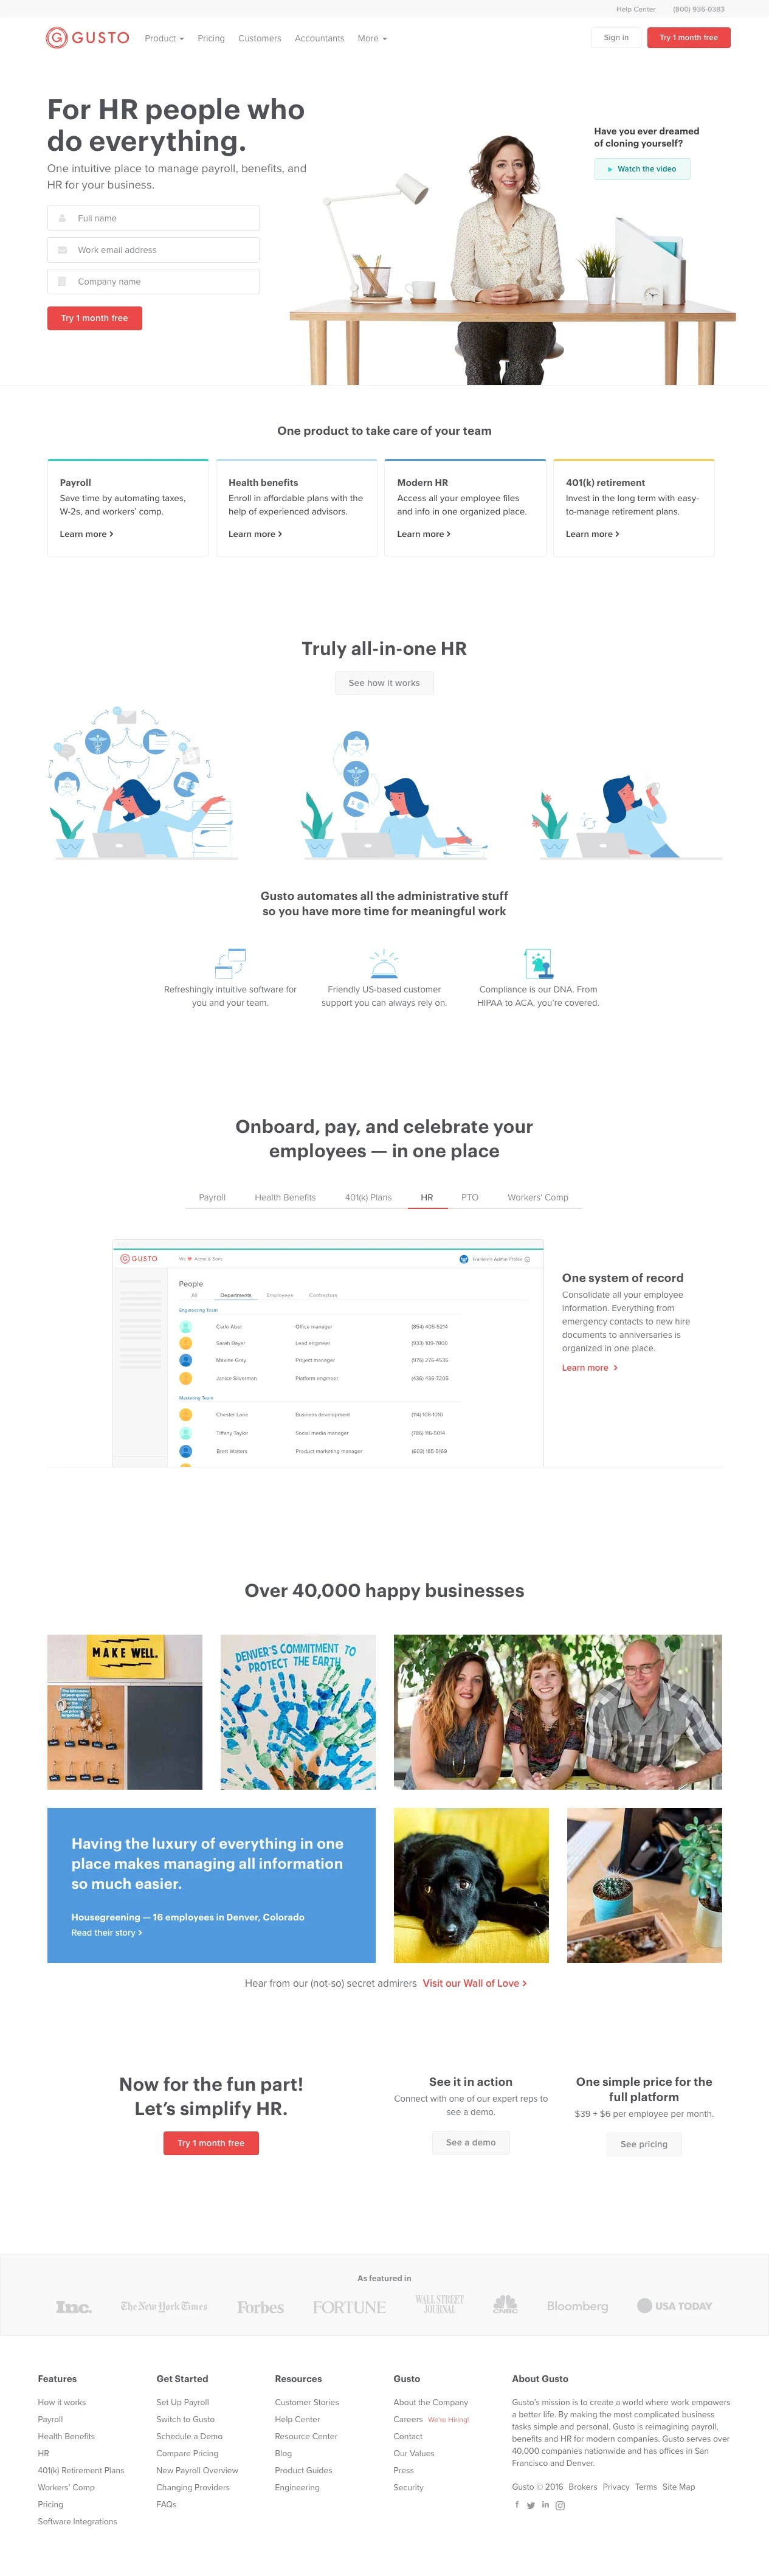 Gusto Landing Page Example: Online HR Services: Payroll, Benefits and everything else